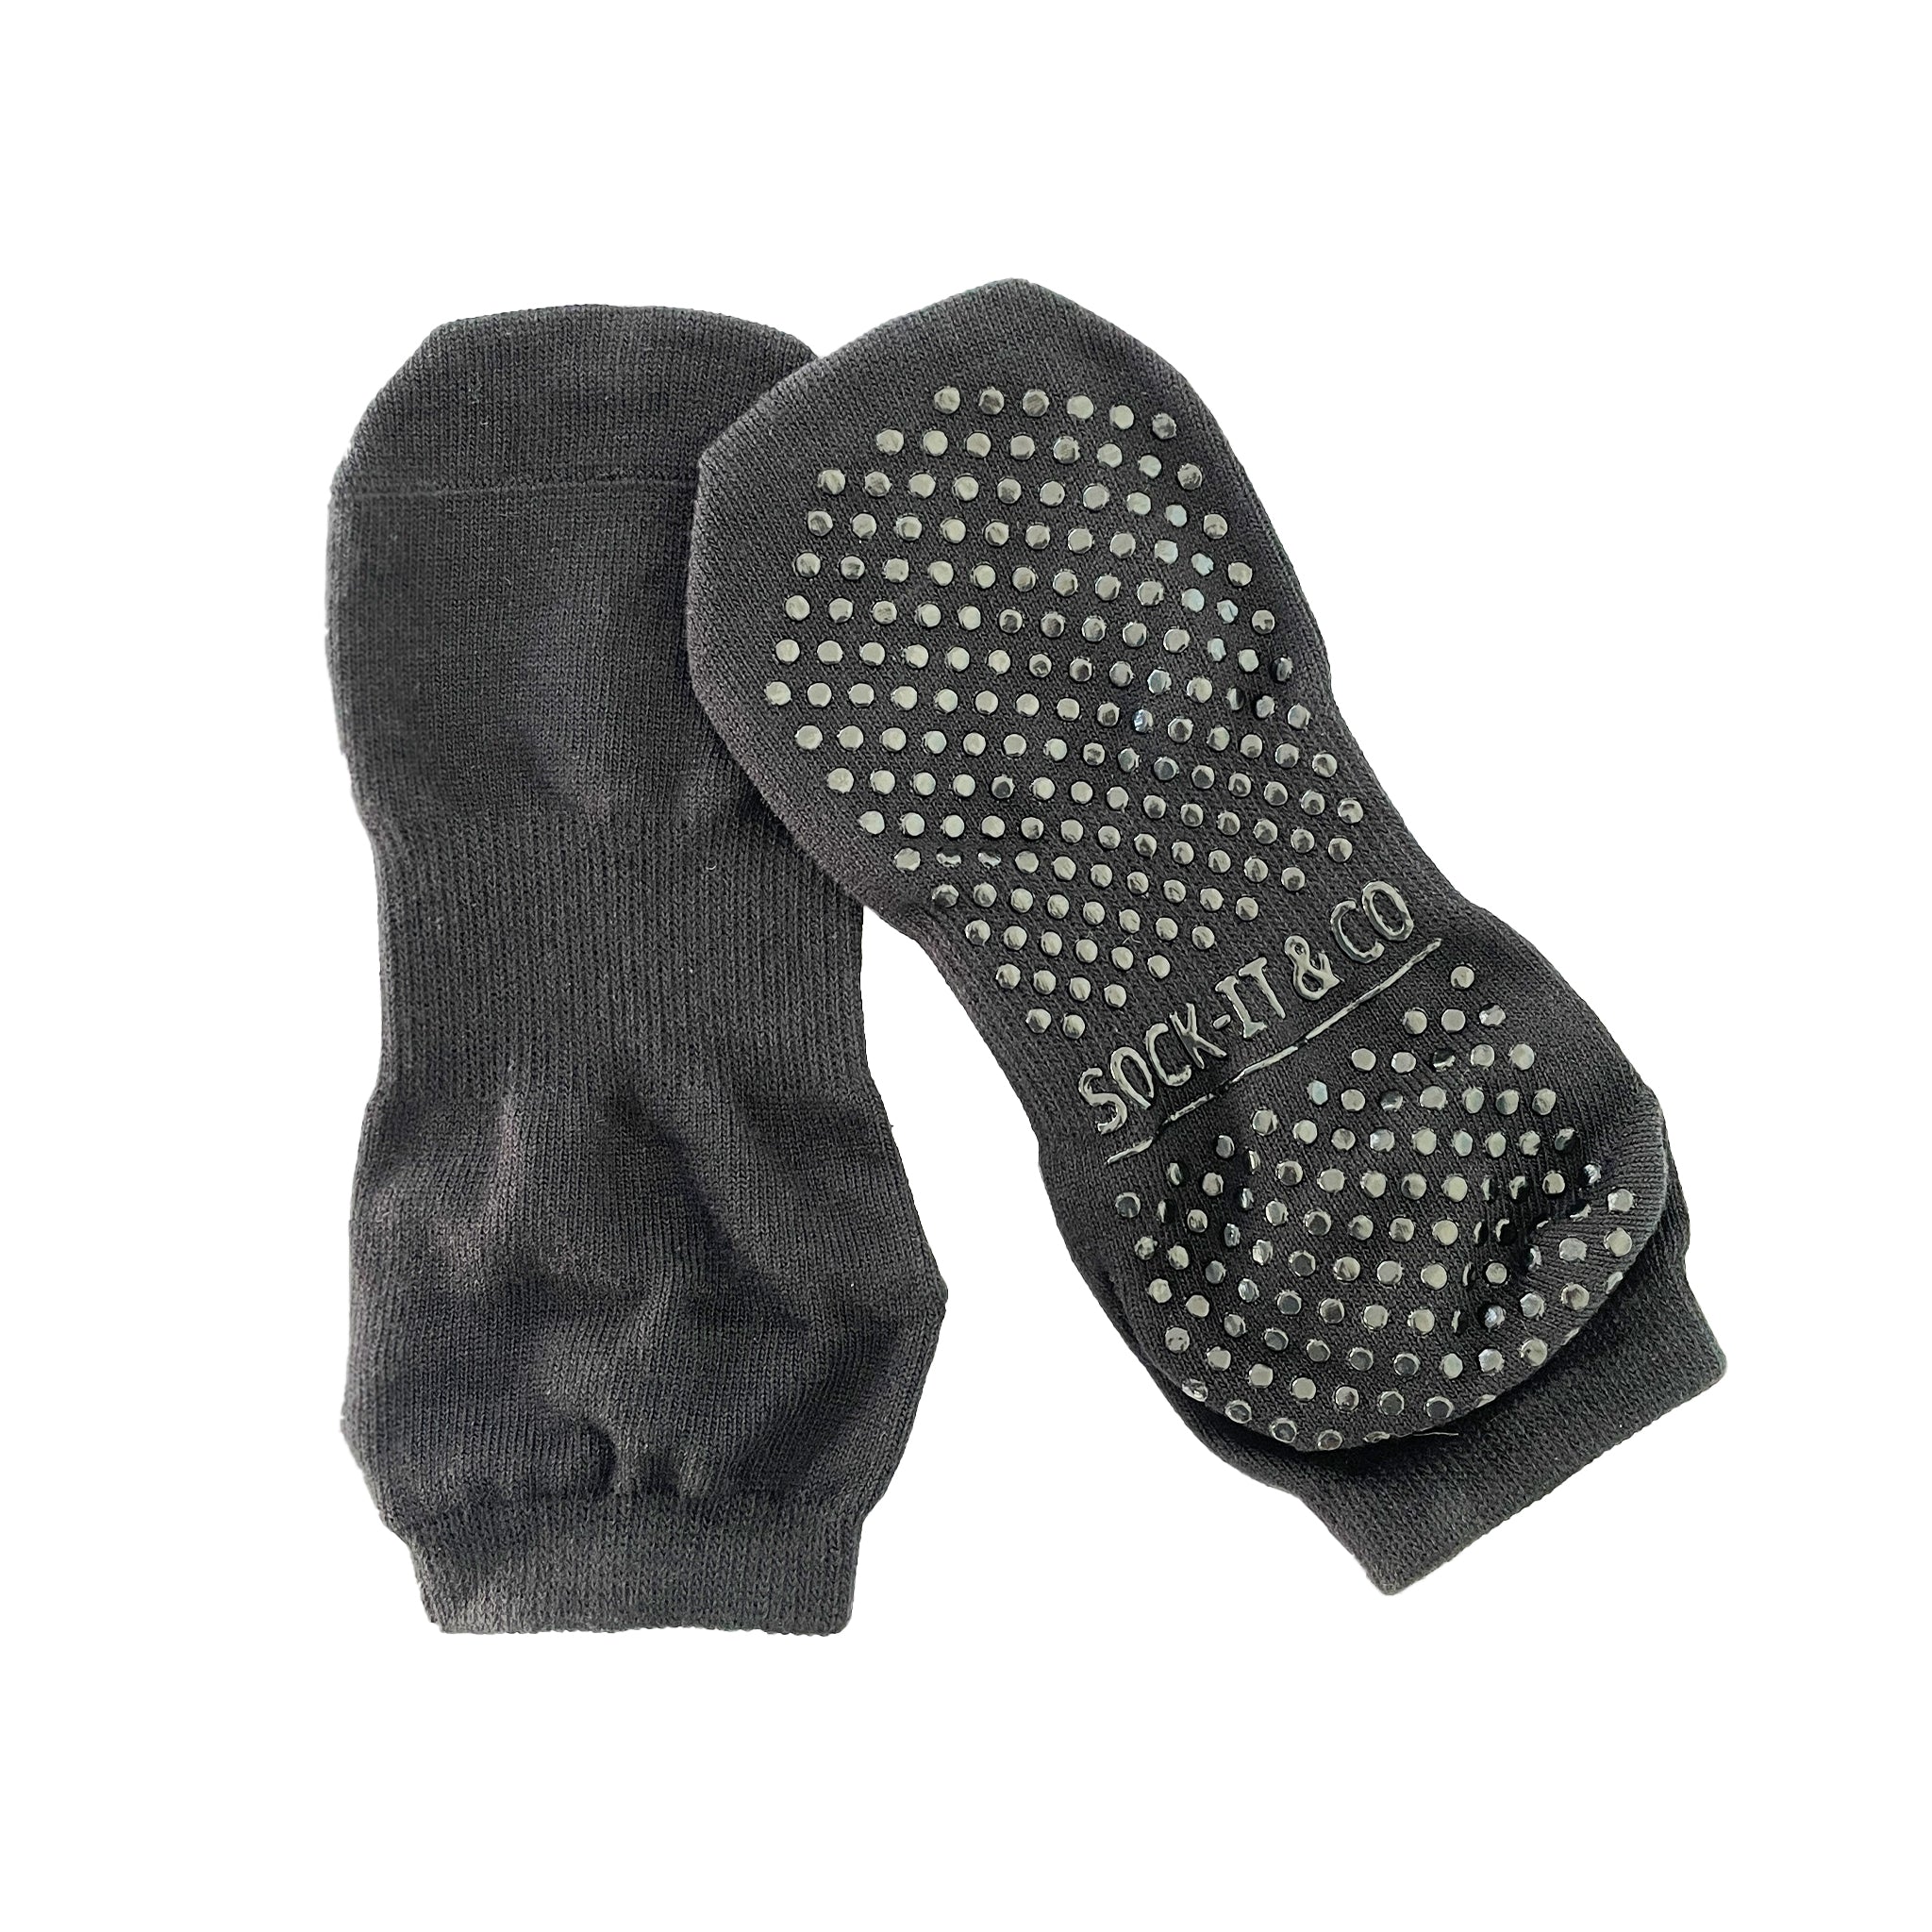 shoppers love these $15 non-slip socks that are perfect for yoga